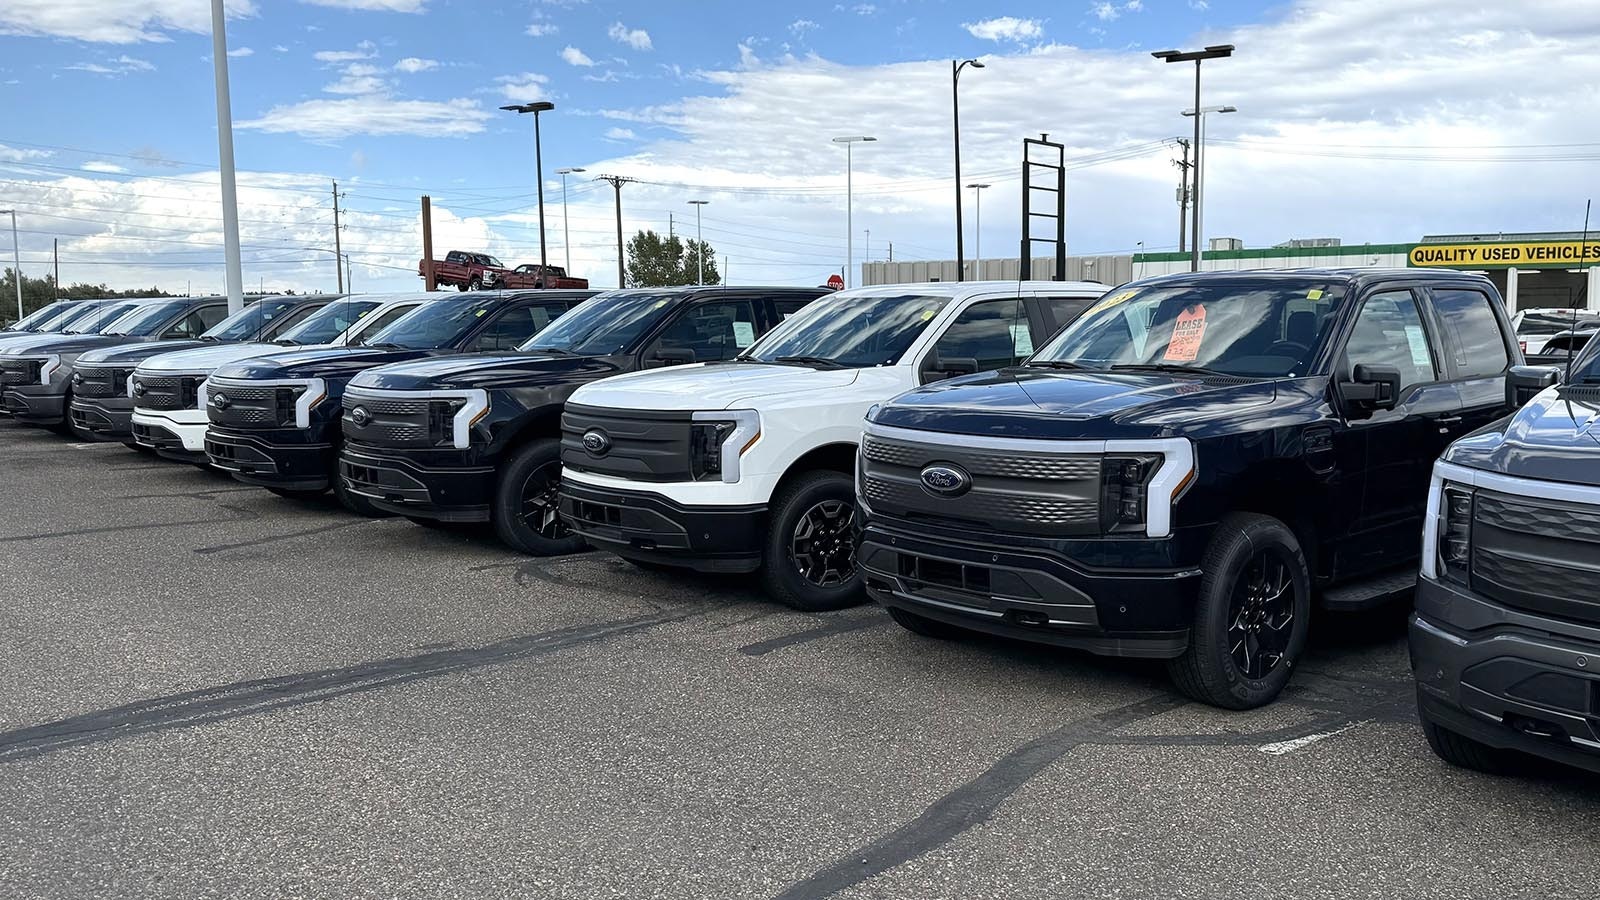 A selection of Ford F-150 Lightning electric trucks at Ken Garff Ford in Cheyenne.